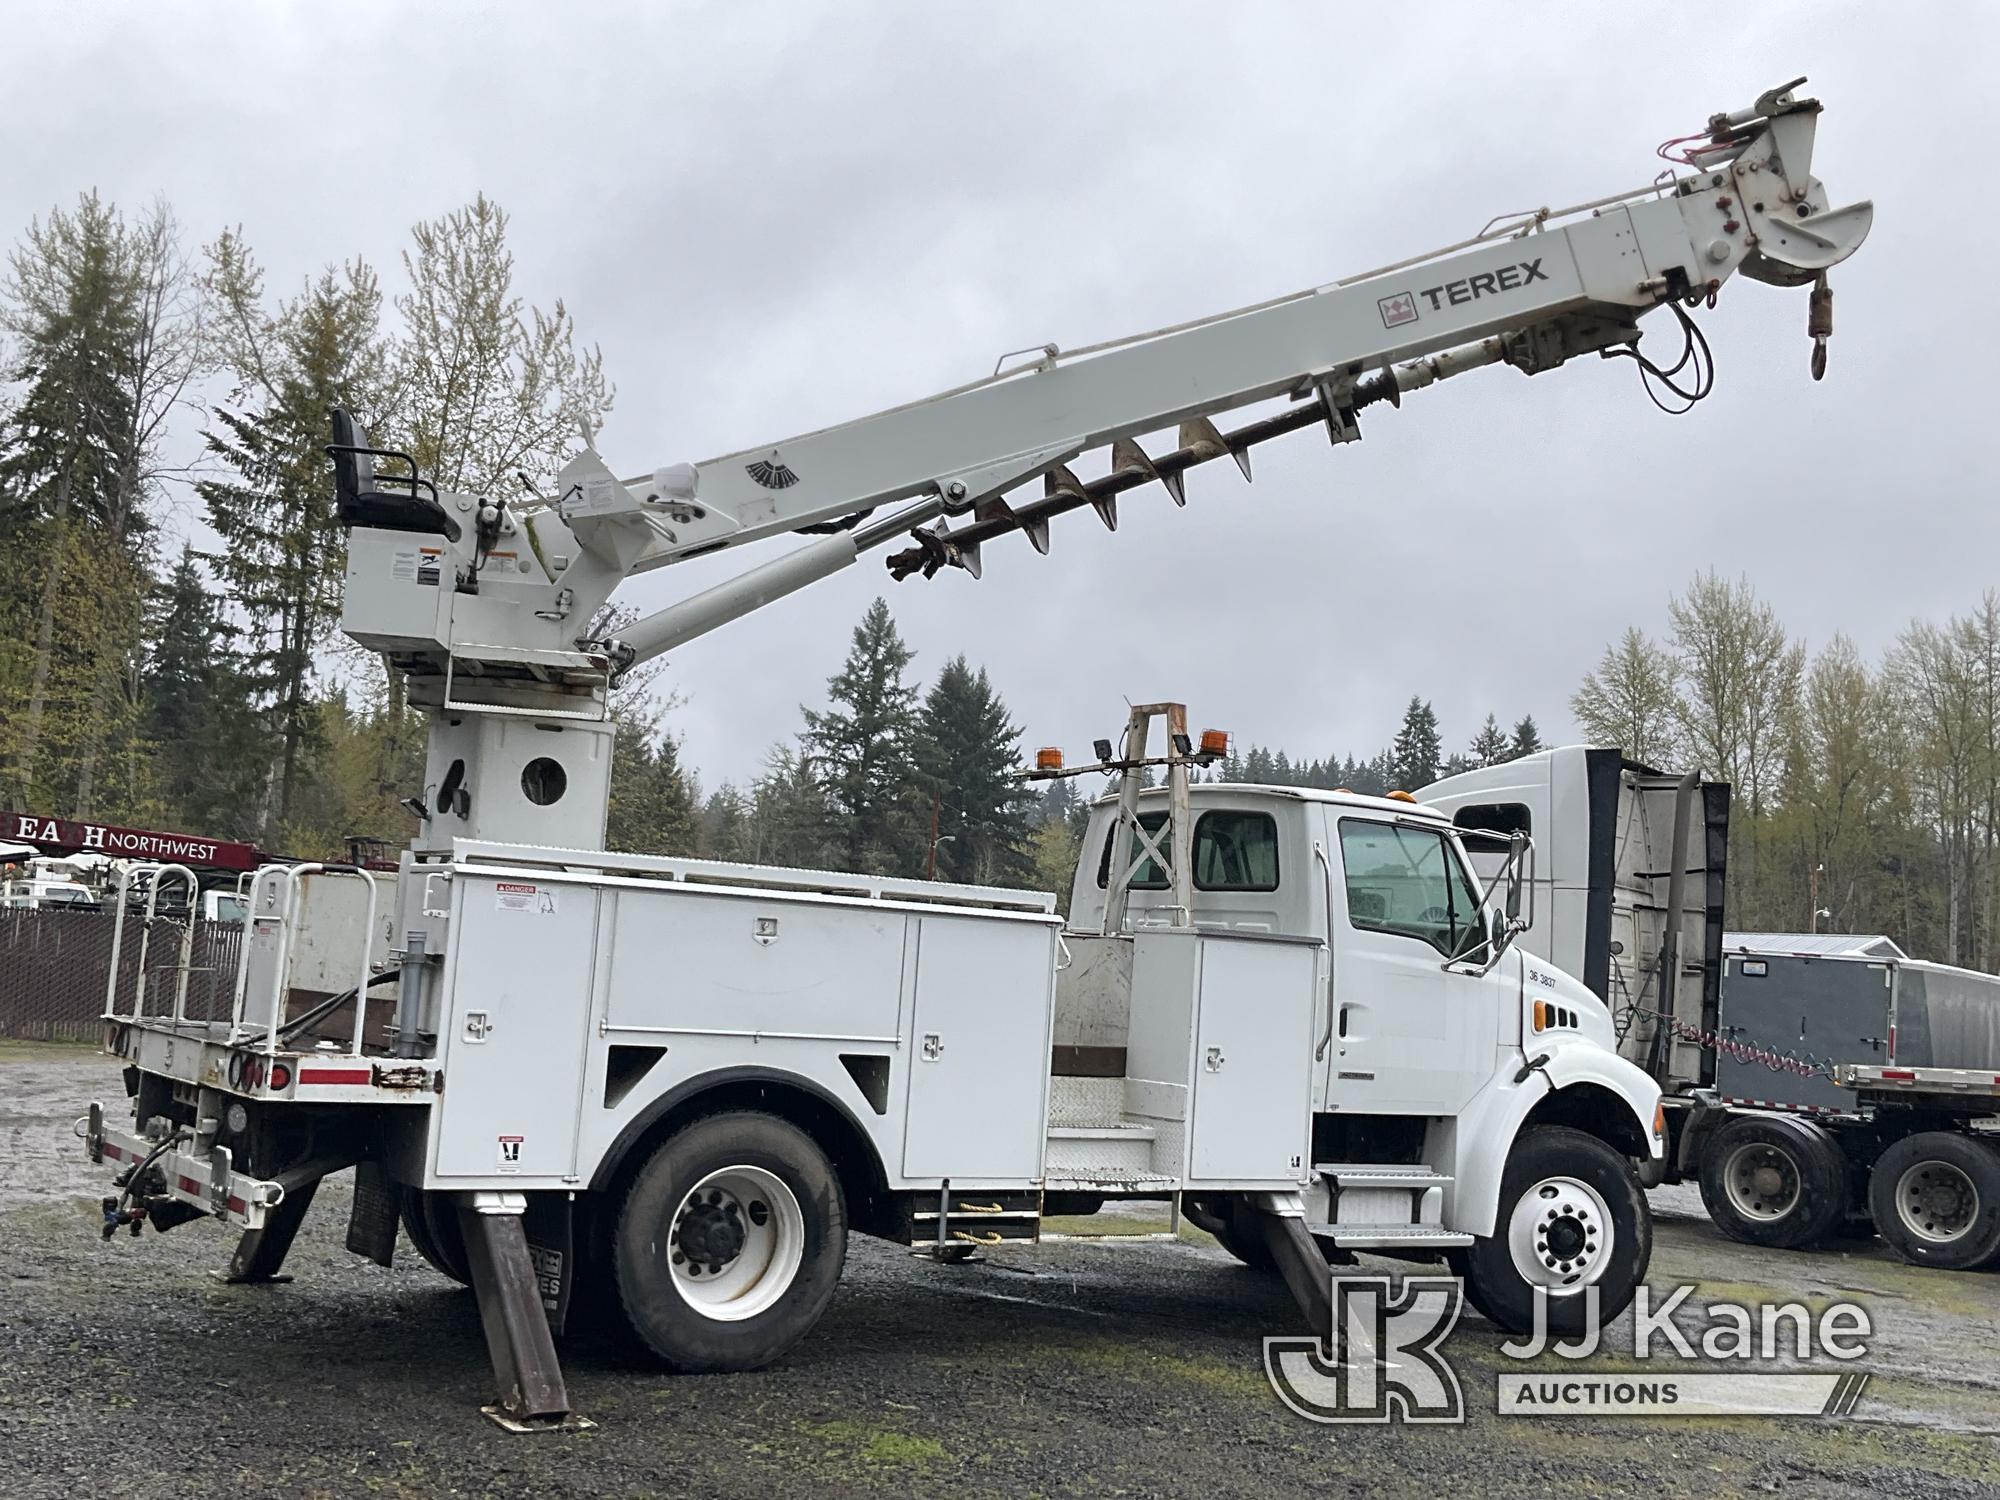 (Eatonville, WA) Telelect Commander 4047, Digger Derrick rear mounted on 2007 Sterling Acterra Utili